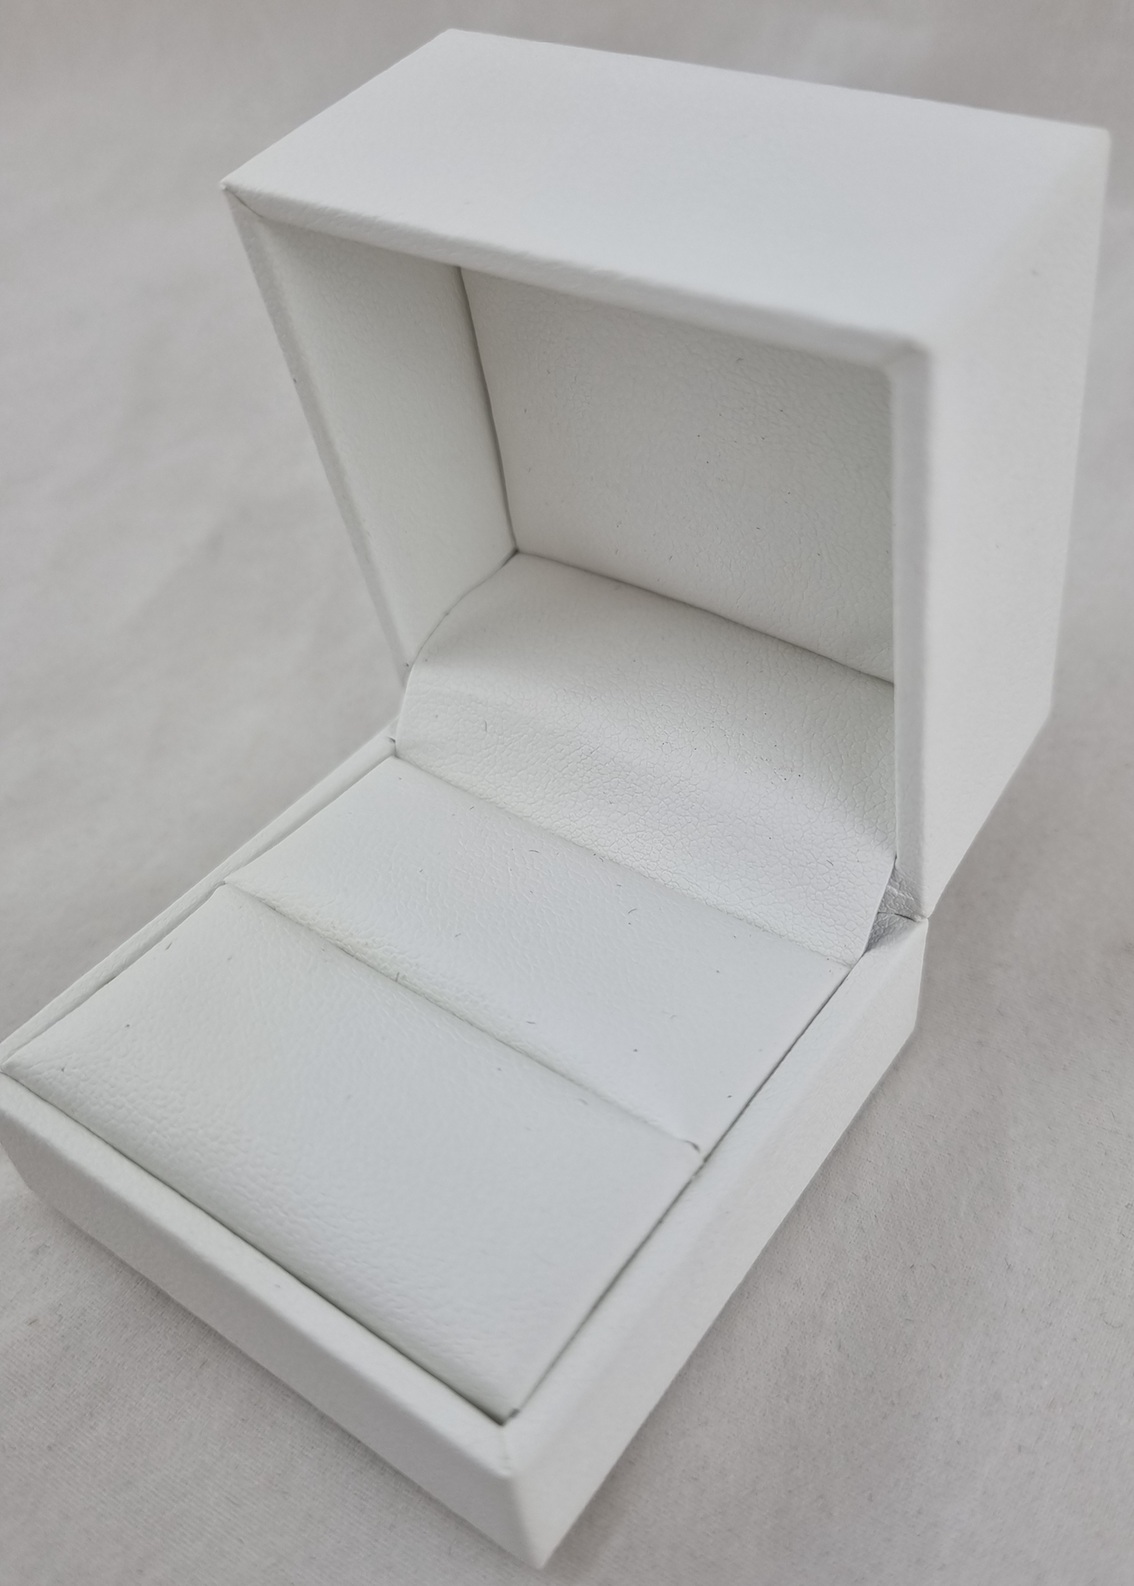 Jewellery Packaging Boxes - Platinum Packaging - Products - Platinum ...